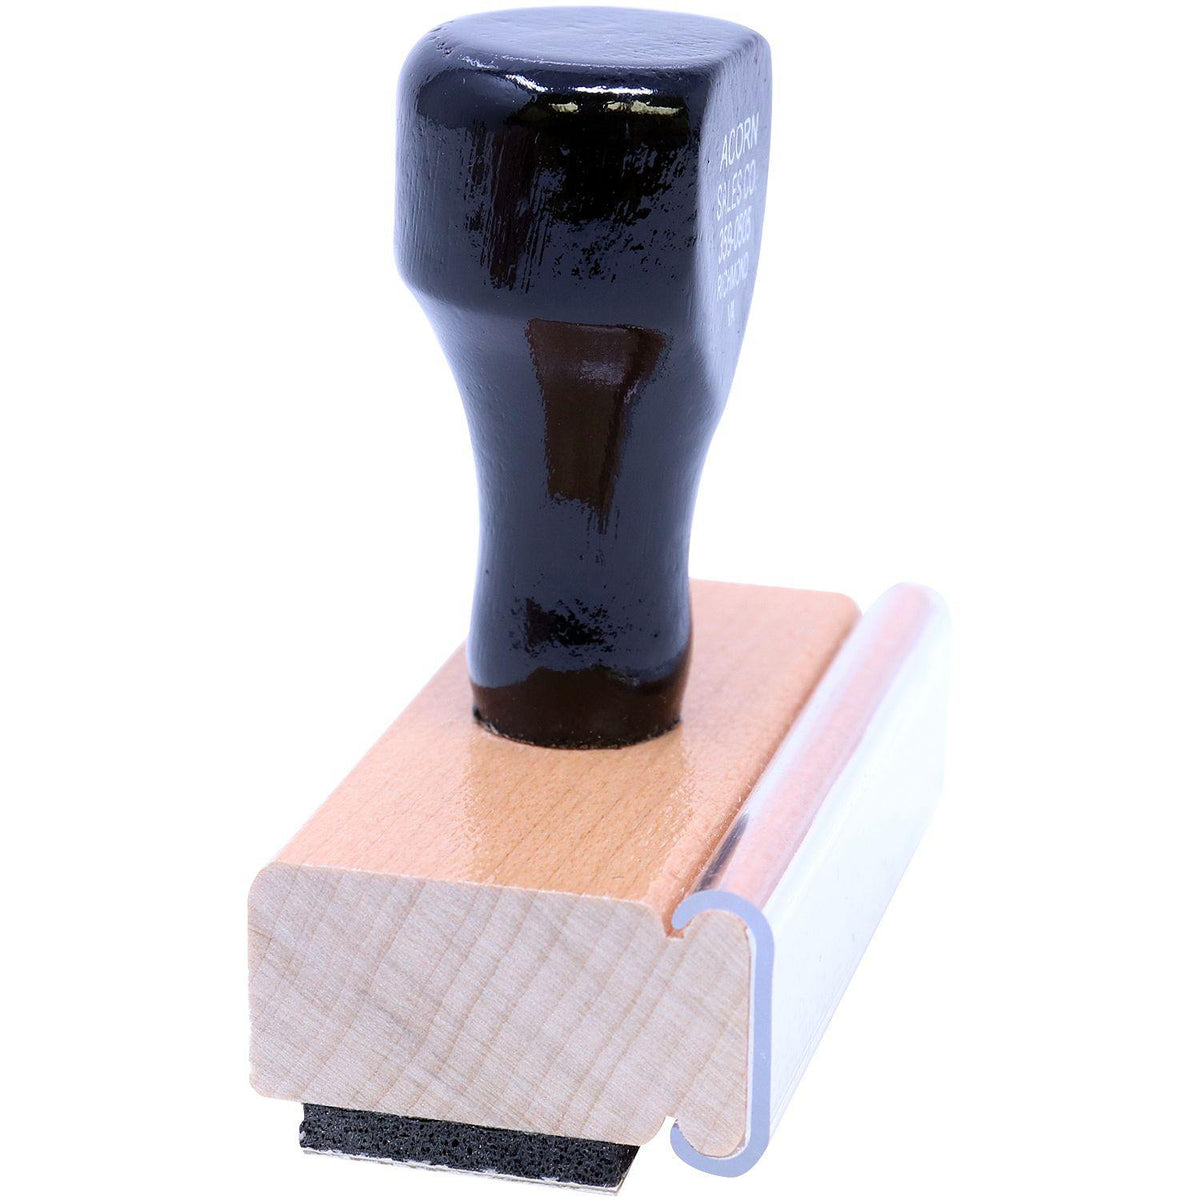 Side View of Credit Report Rubber Stamp at an Angle